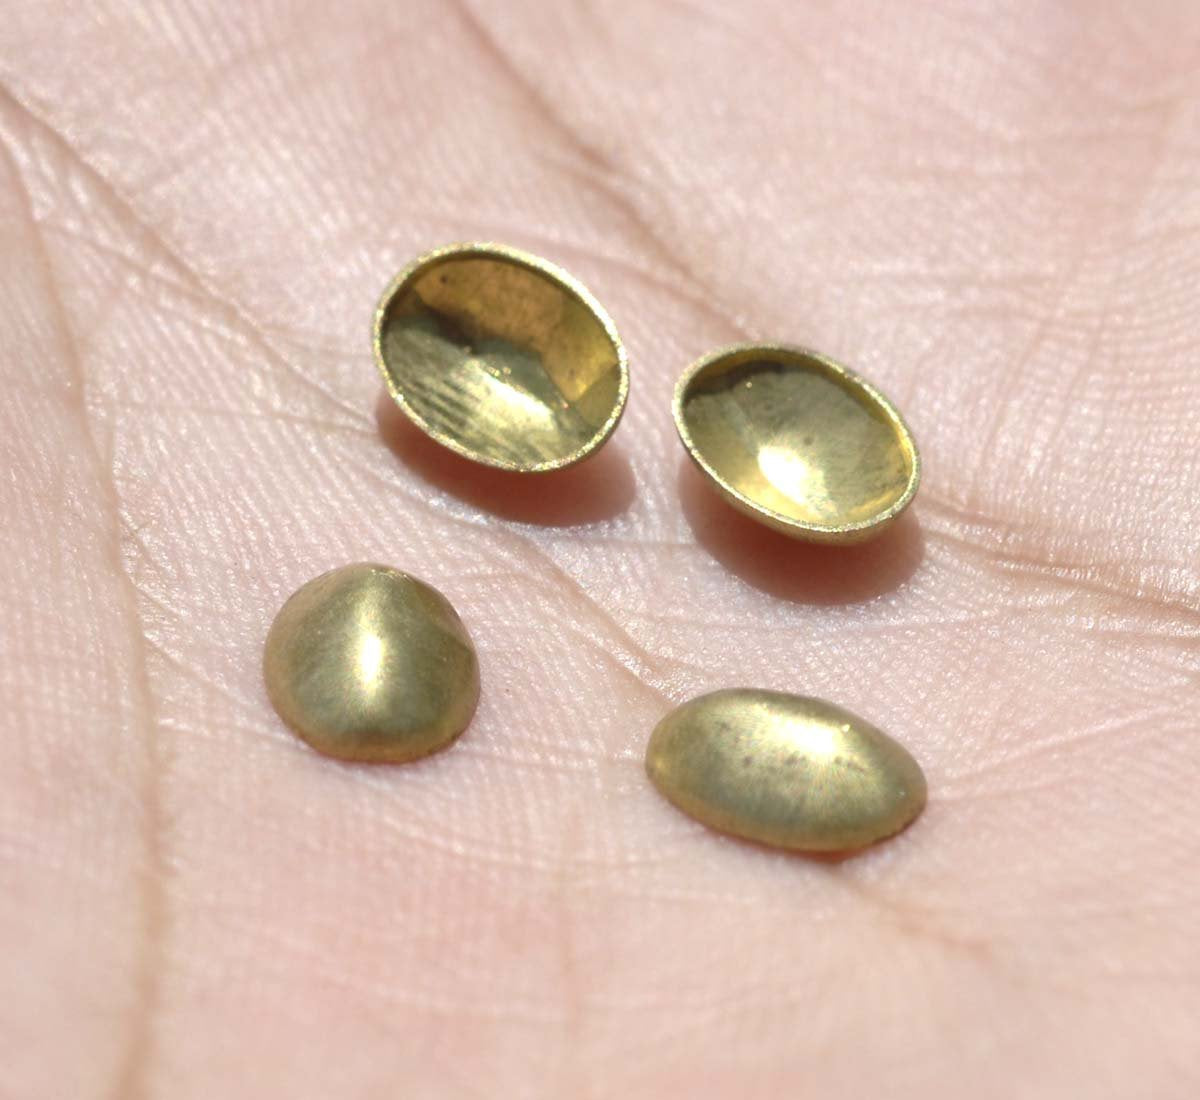 Oval Caps, Terminators Finials Shape , Jewelry Finding, Available in a Variety Metals, 8.6 x 6.6mm 2.8 Tall